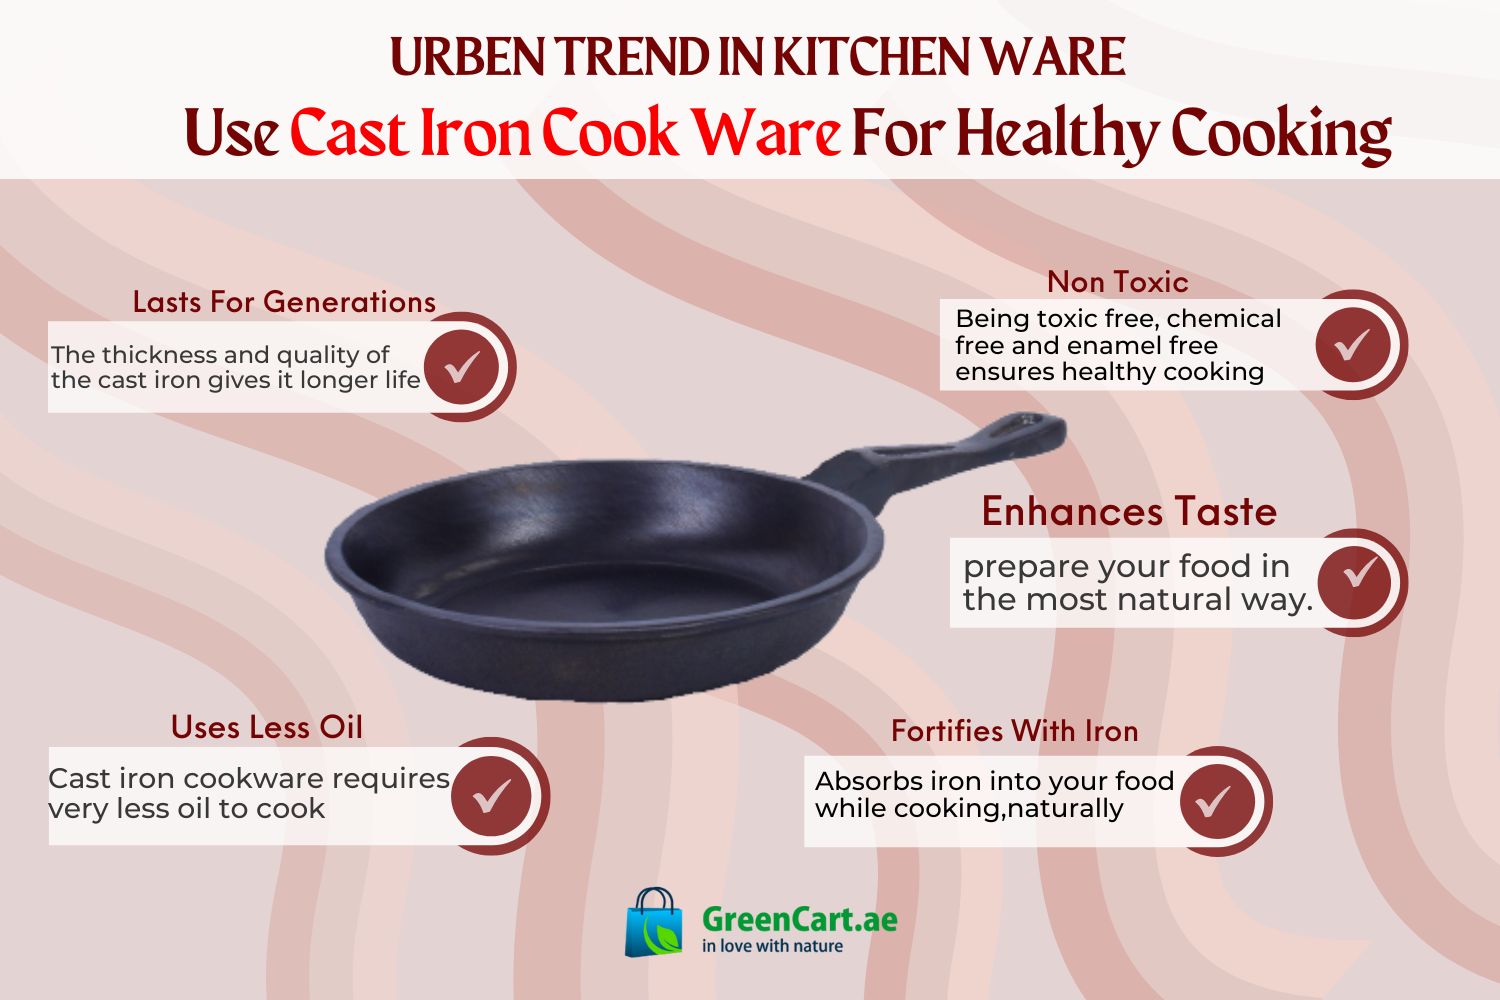 CAST IRON COOKWARE-THE URBAN TREND